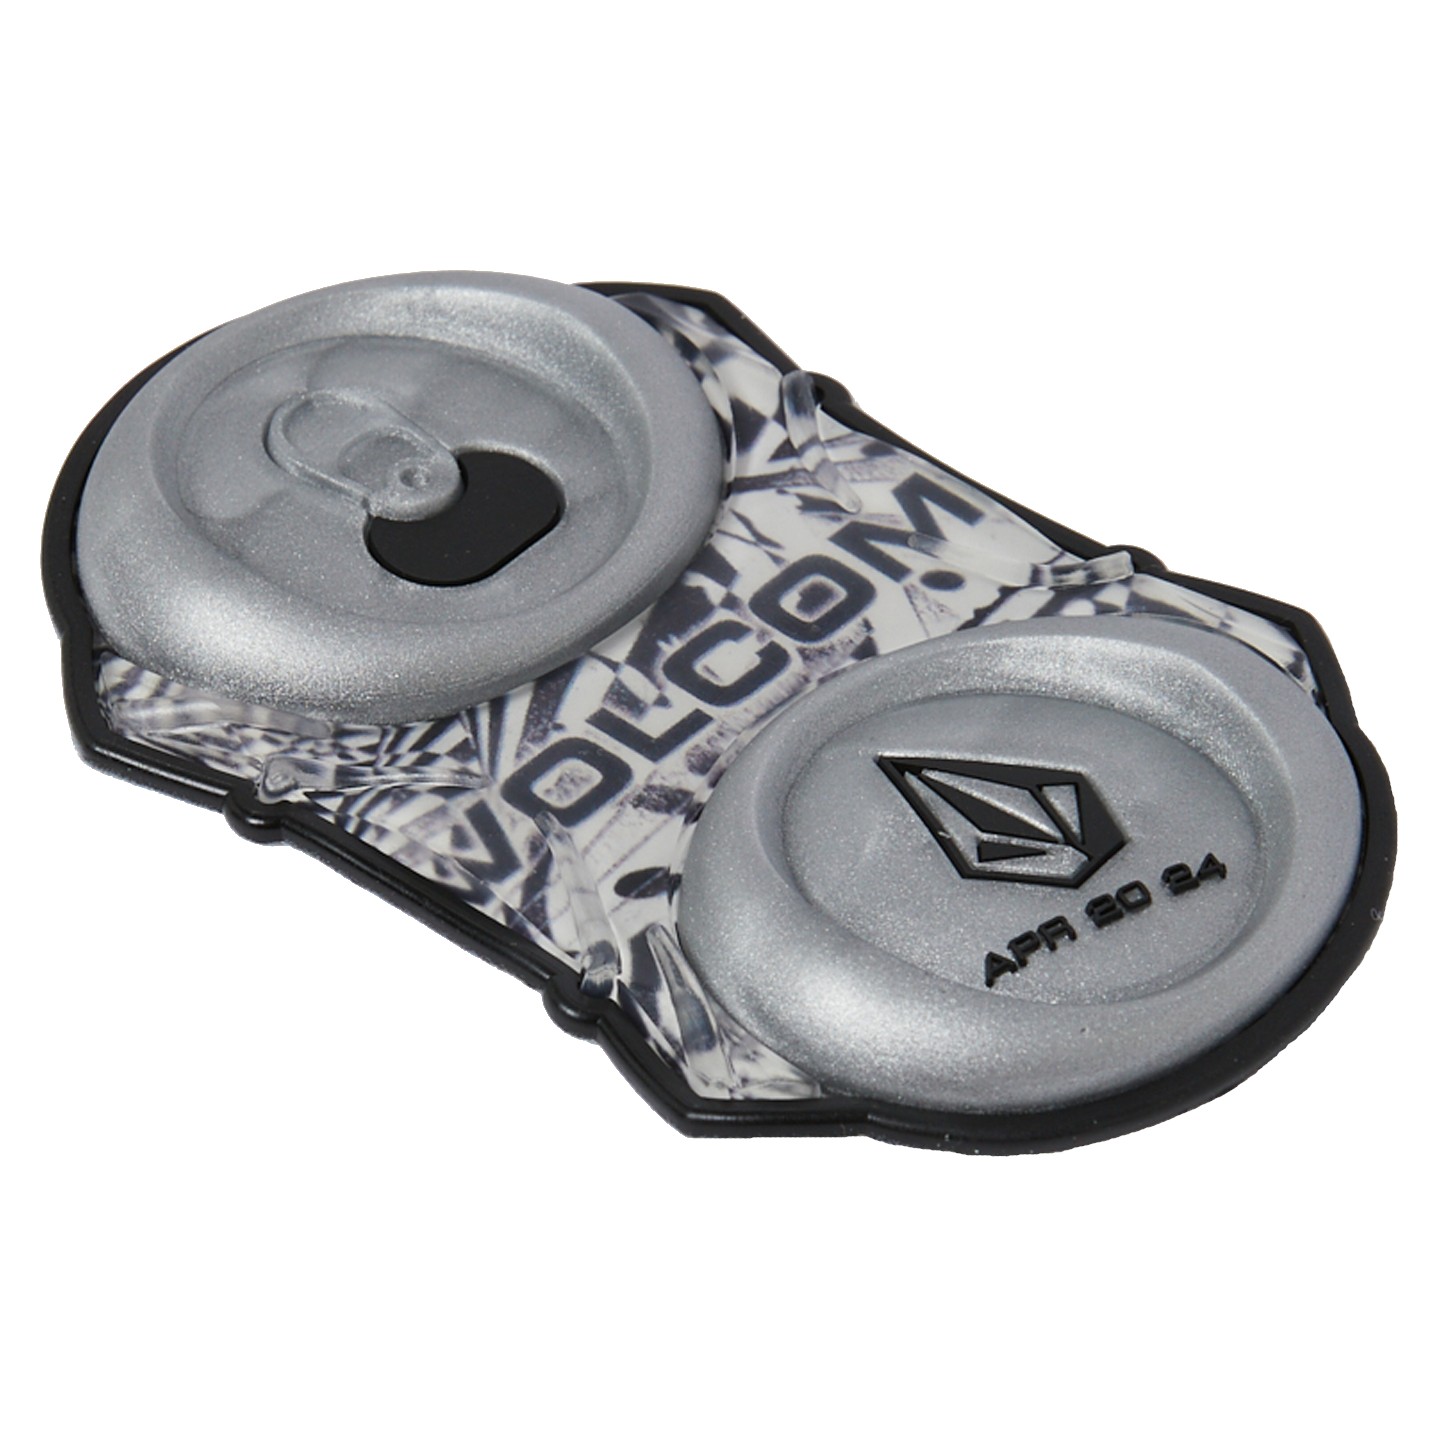 Volcom Crushed Can Snowboard Stomp Pad